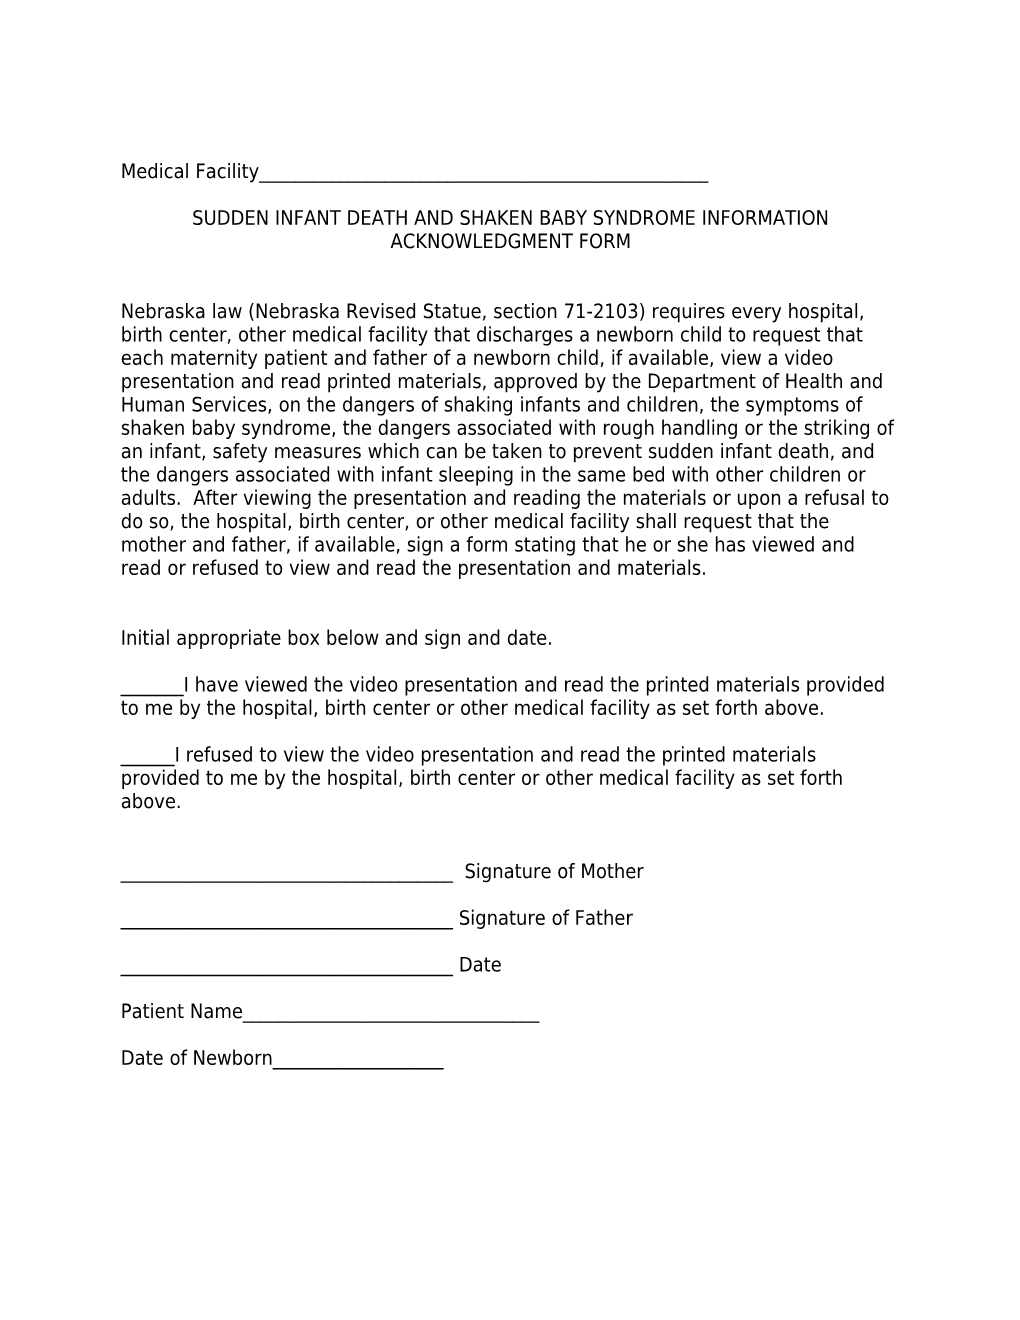 Sudden Infant Death and Shaken Baby Syndrome Information Acknowledgment Form